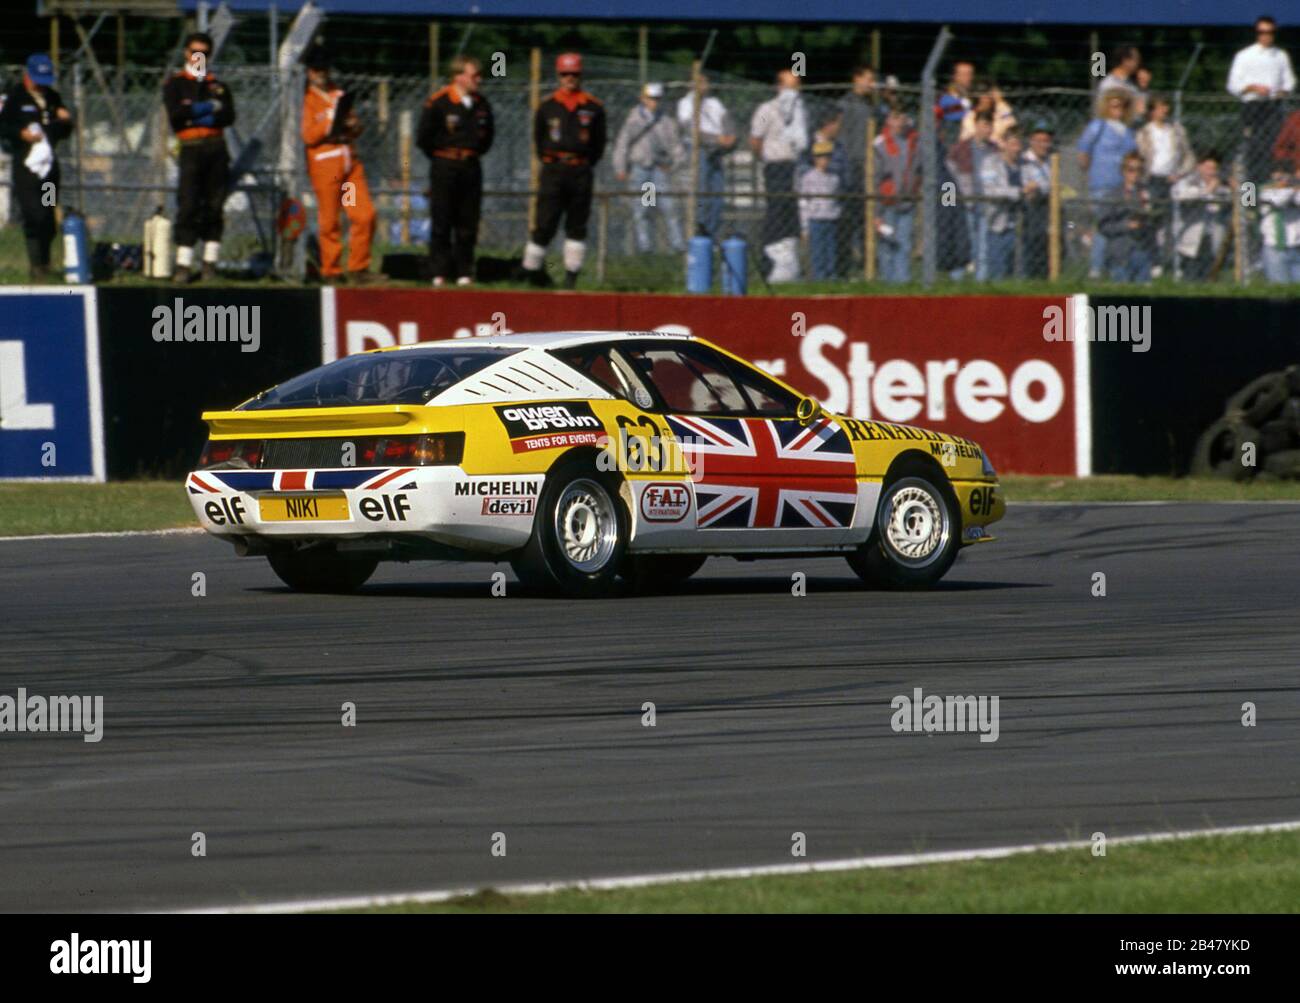 Renault Alpine V6 Elf Turbo at Silverstone, Europa Cup Round 4 1988 Stock Photo